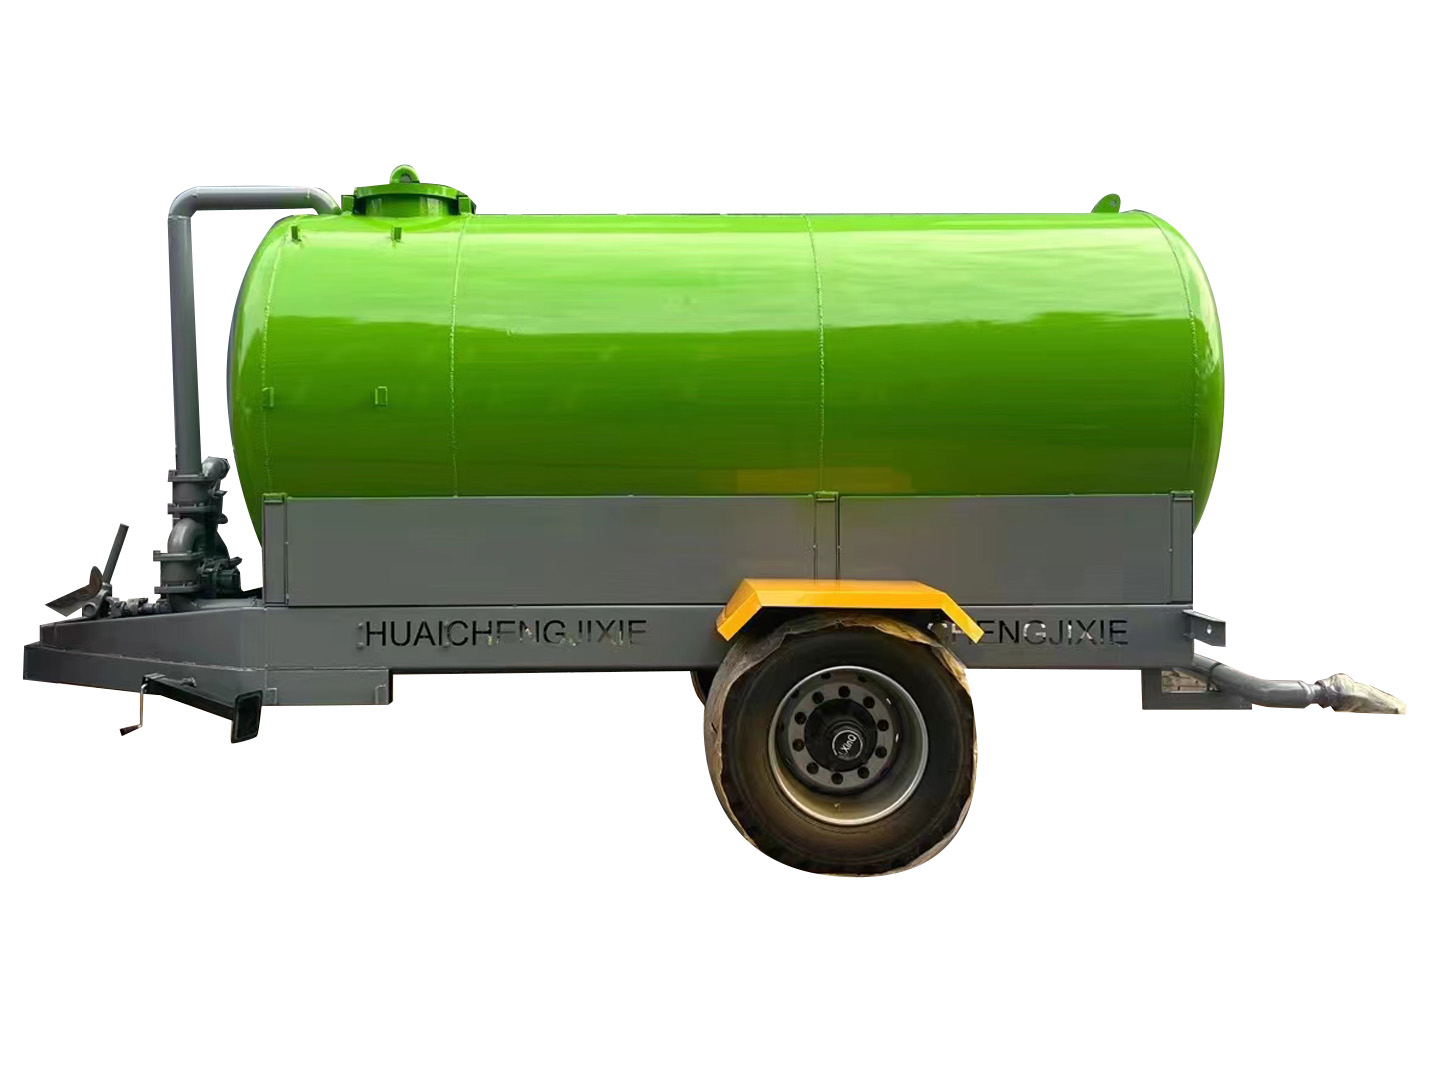 Liquid fertilizer applicator that effectively increases yield